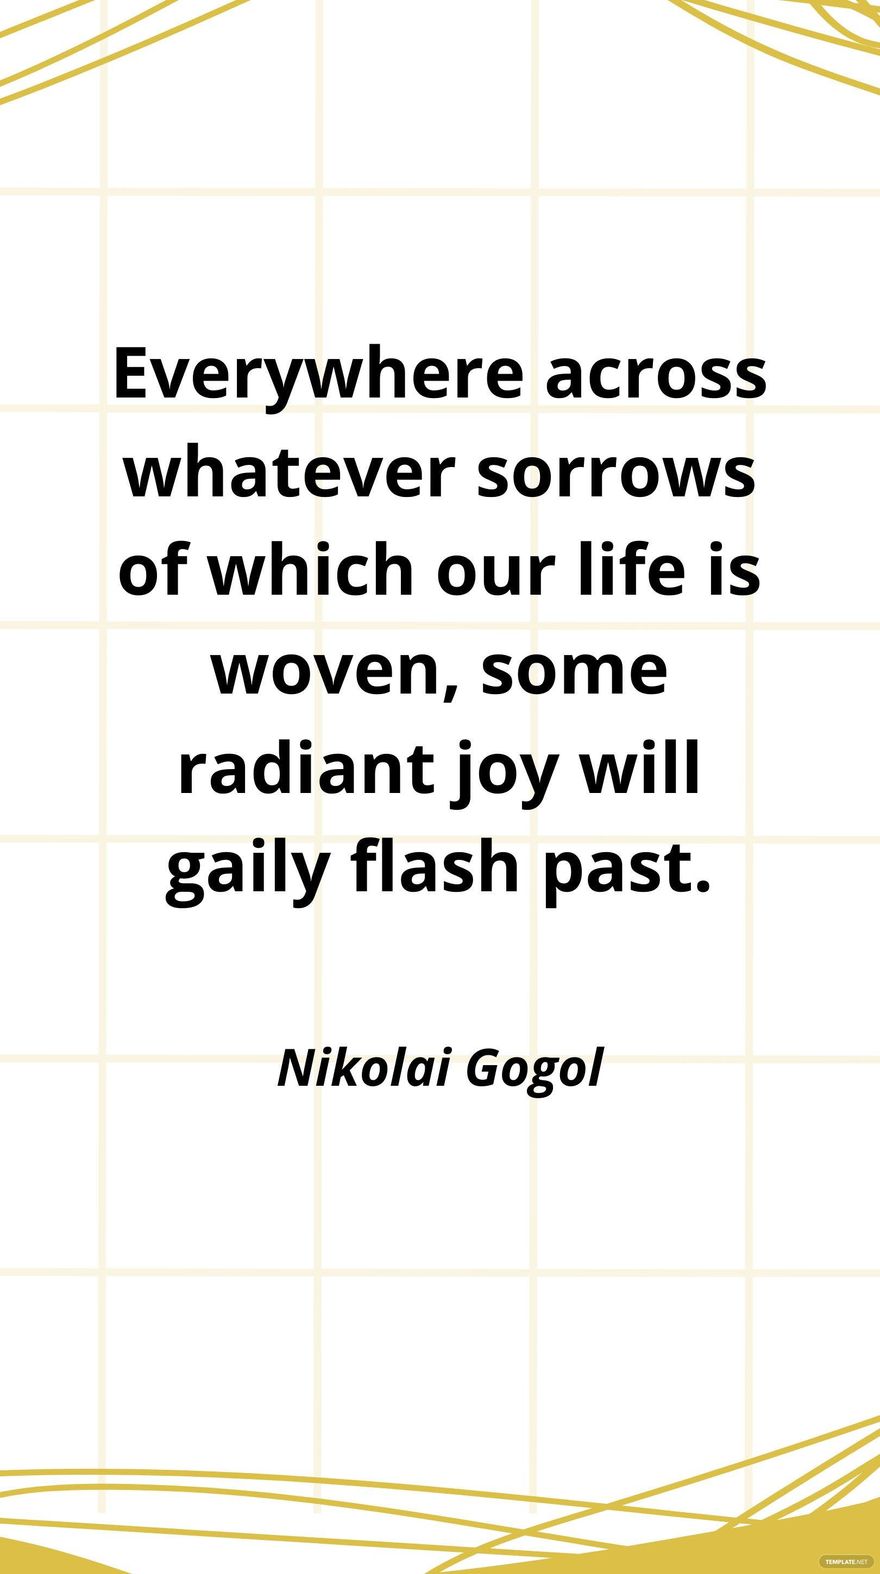 Nikolai Gogol - Everywhere across whatever sorrows of which our life is woven, some radiant joy will gaily flash past.